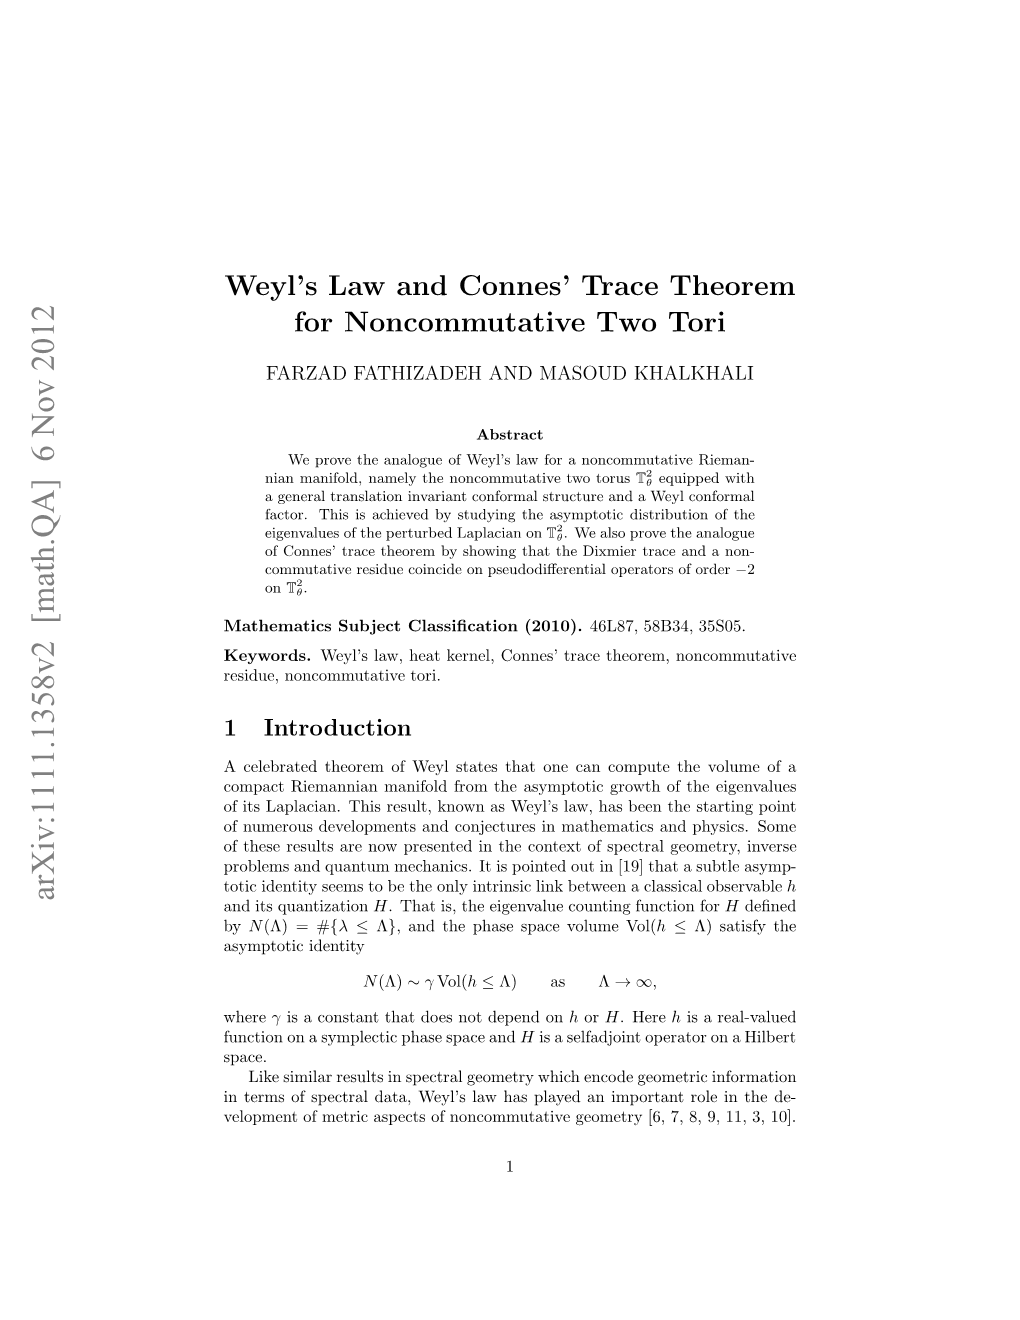 Weyl's Law and Connes' Trace Theorem for Noncommutative Two